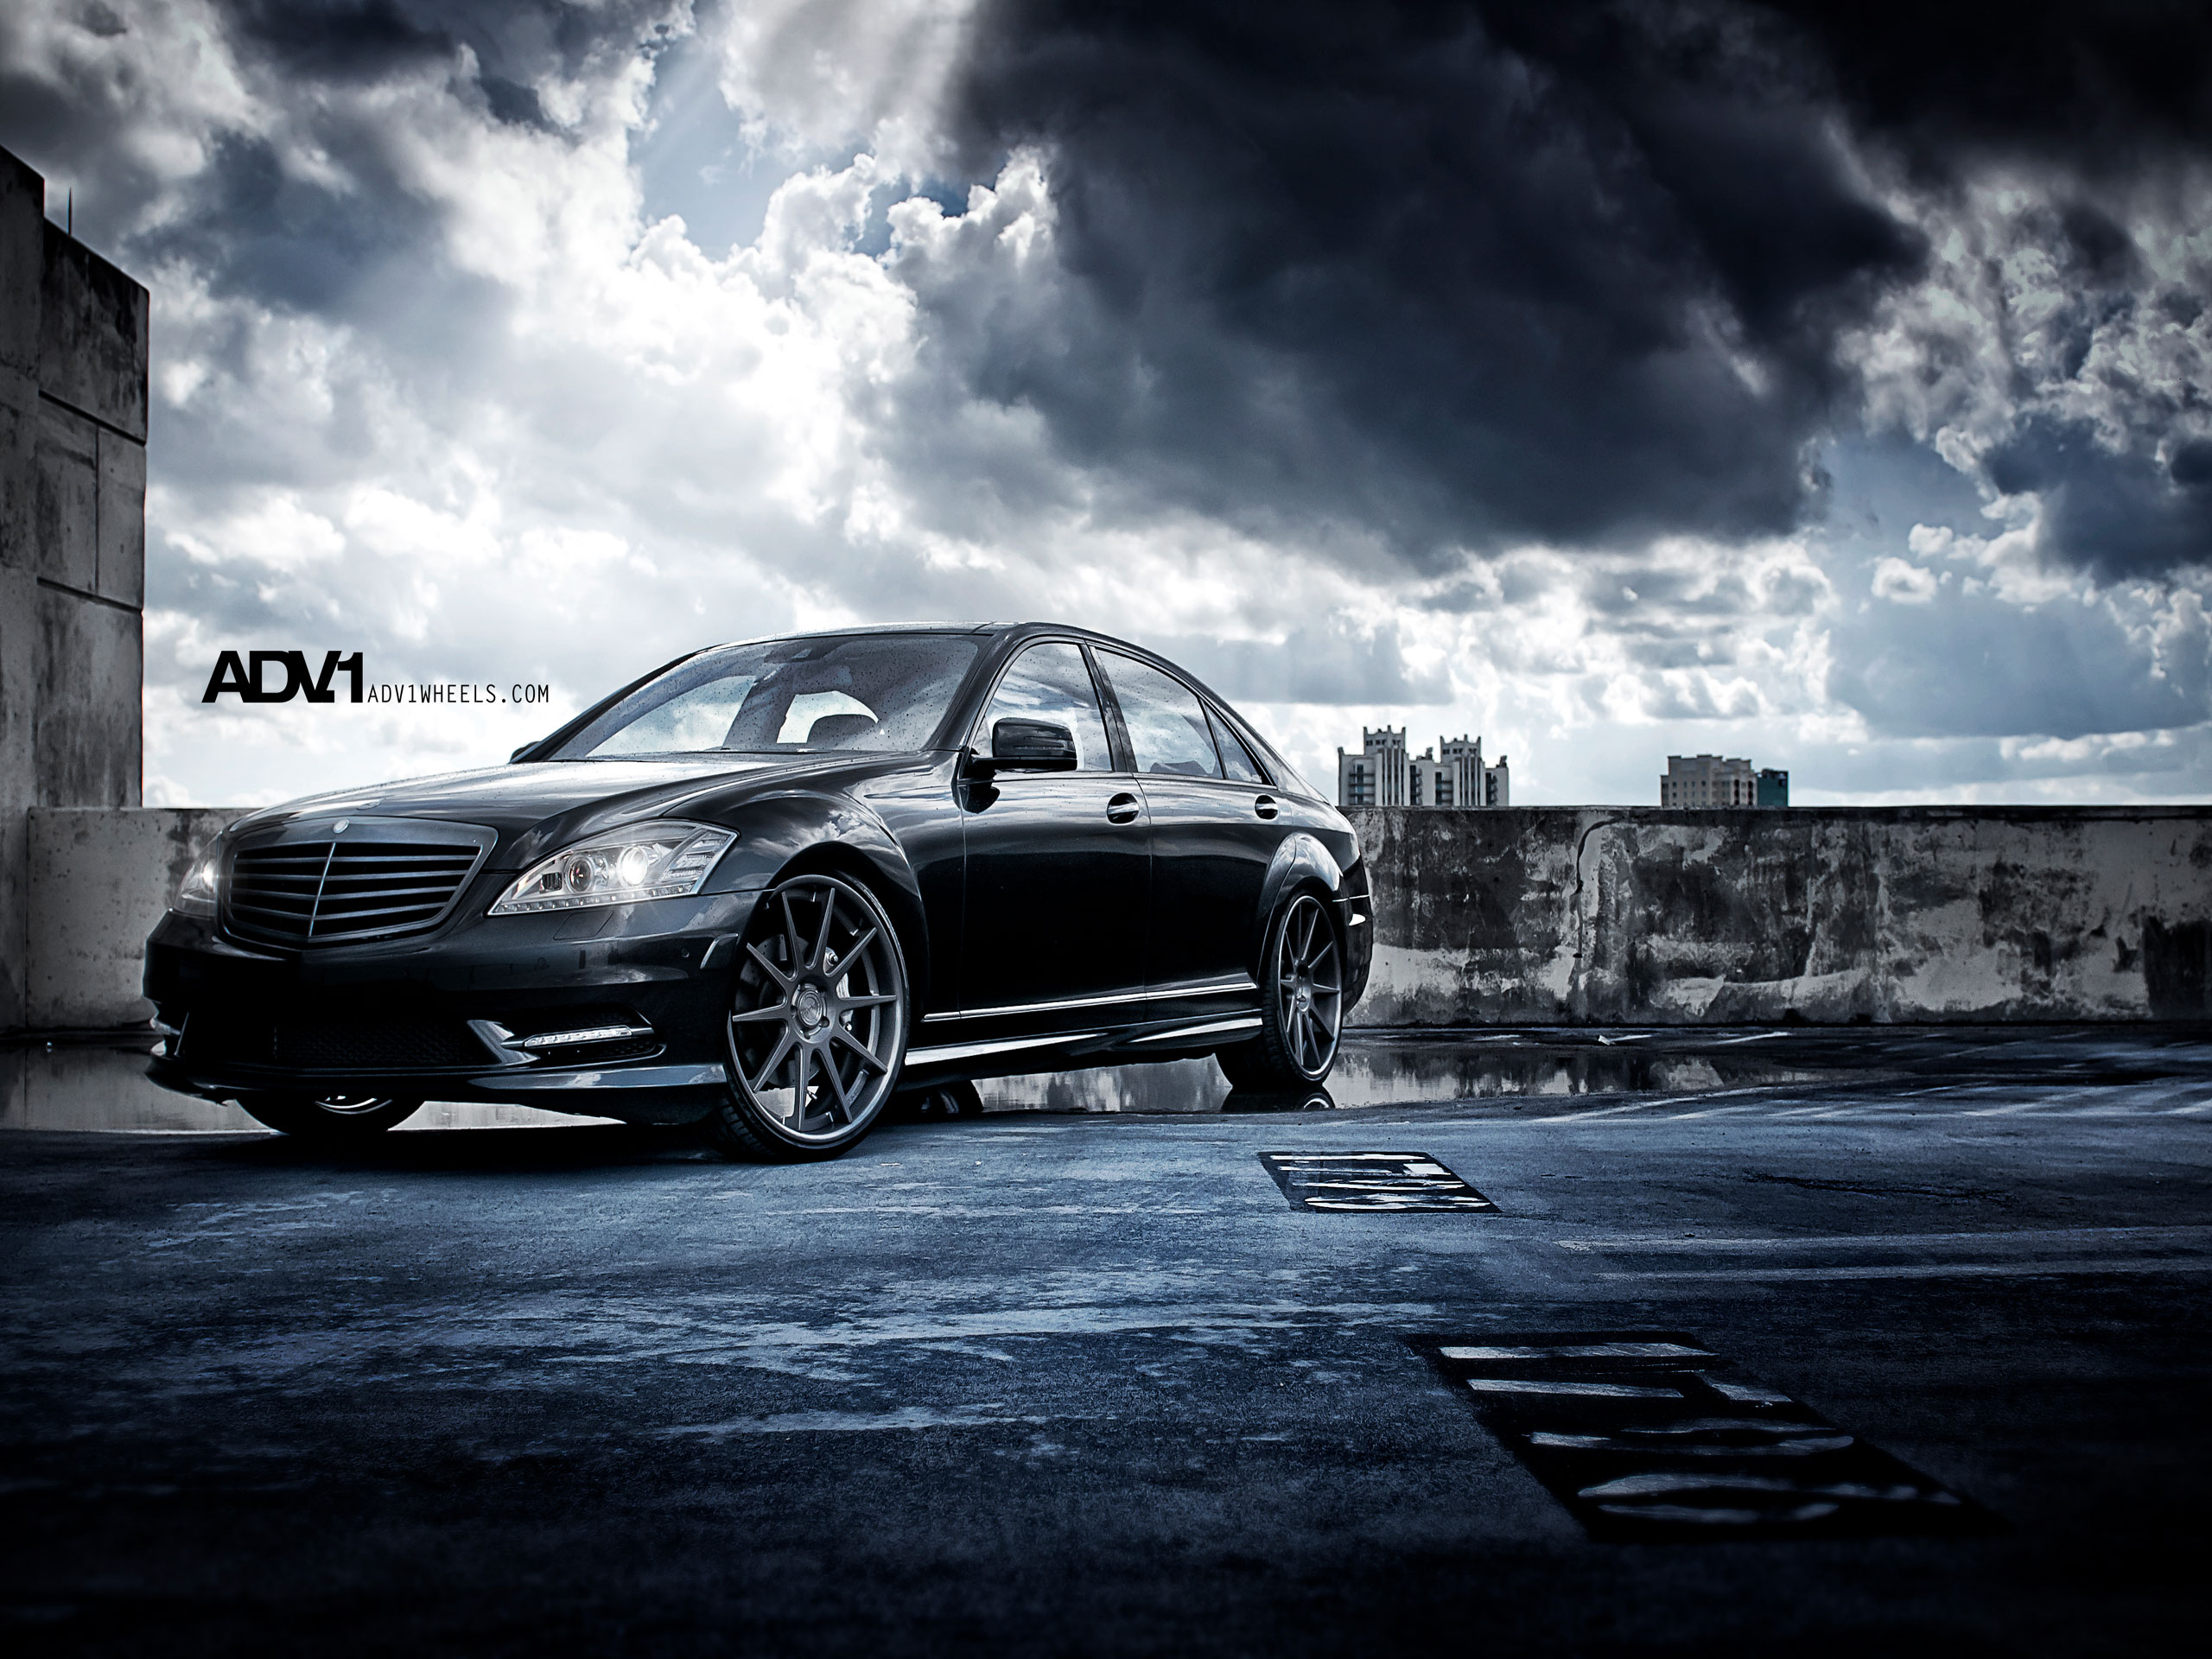 80+ Mercedes-Benz S-Class HD Wallpapers and Backgrounds